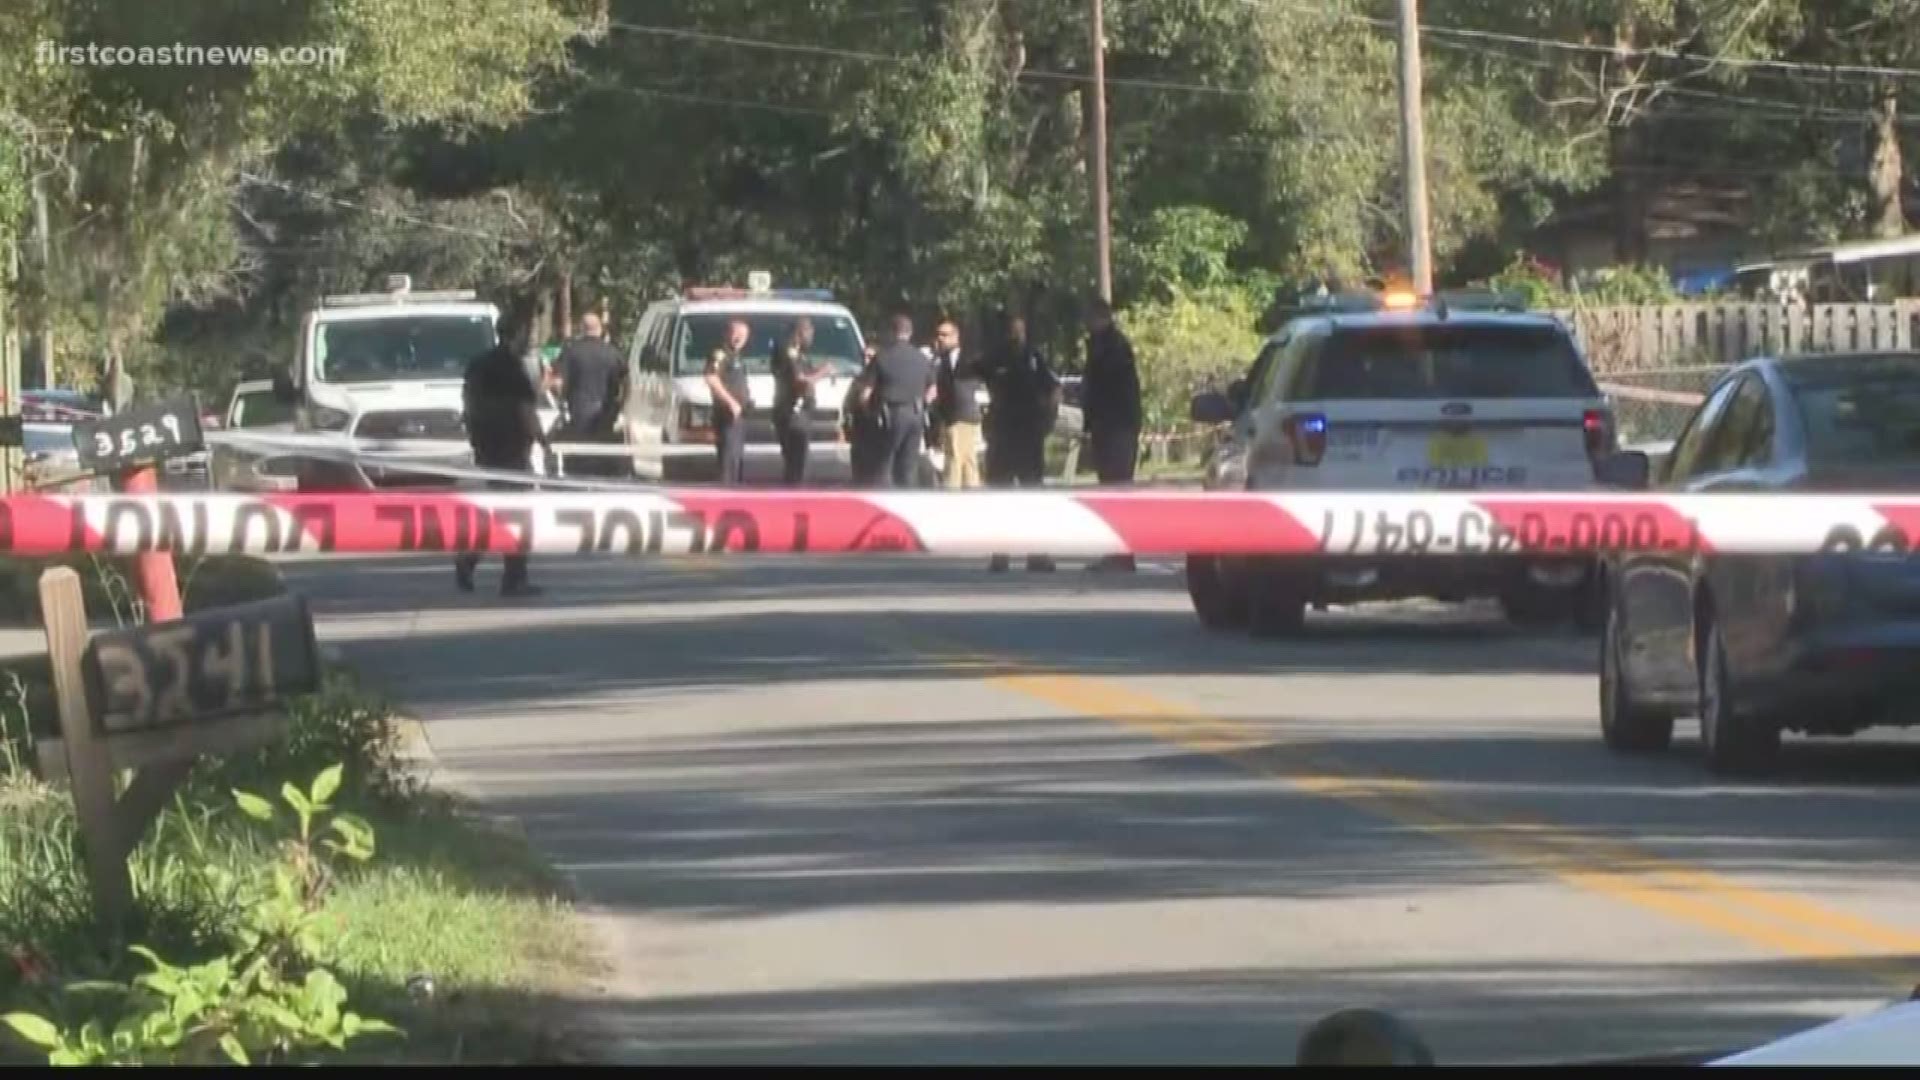 A man was shot and killed while walking in a Lackawanna neighborhood, JSO says. Police are searching for multiple suspects.